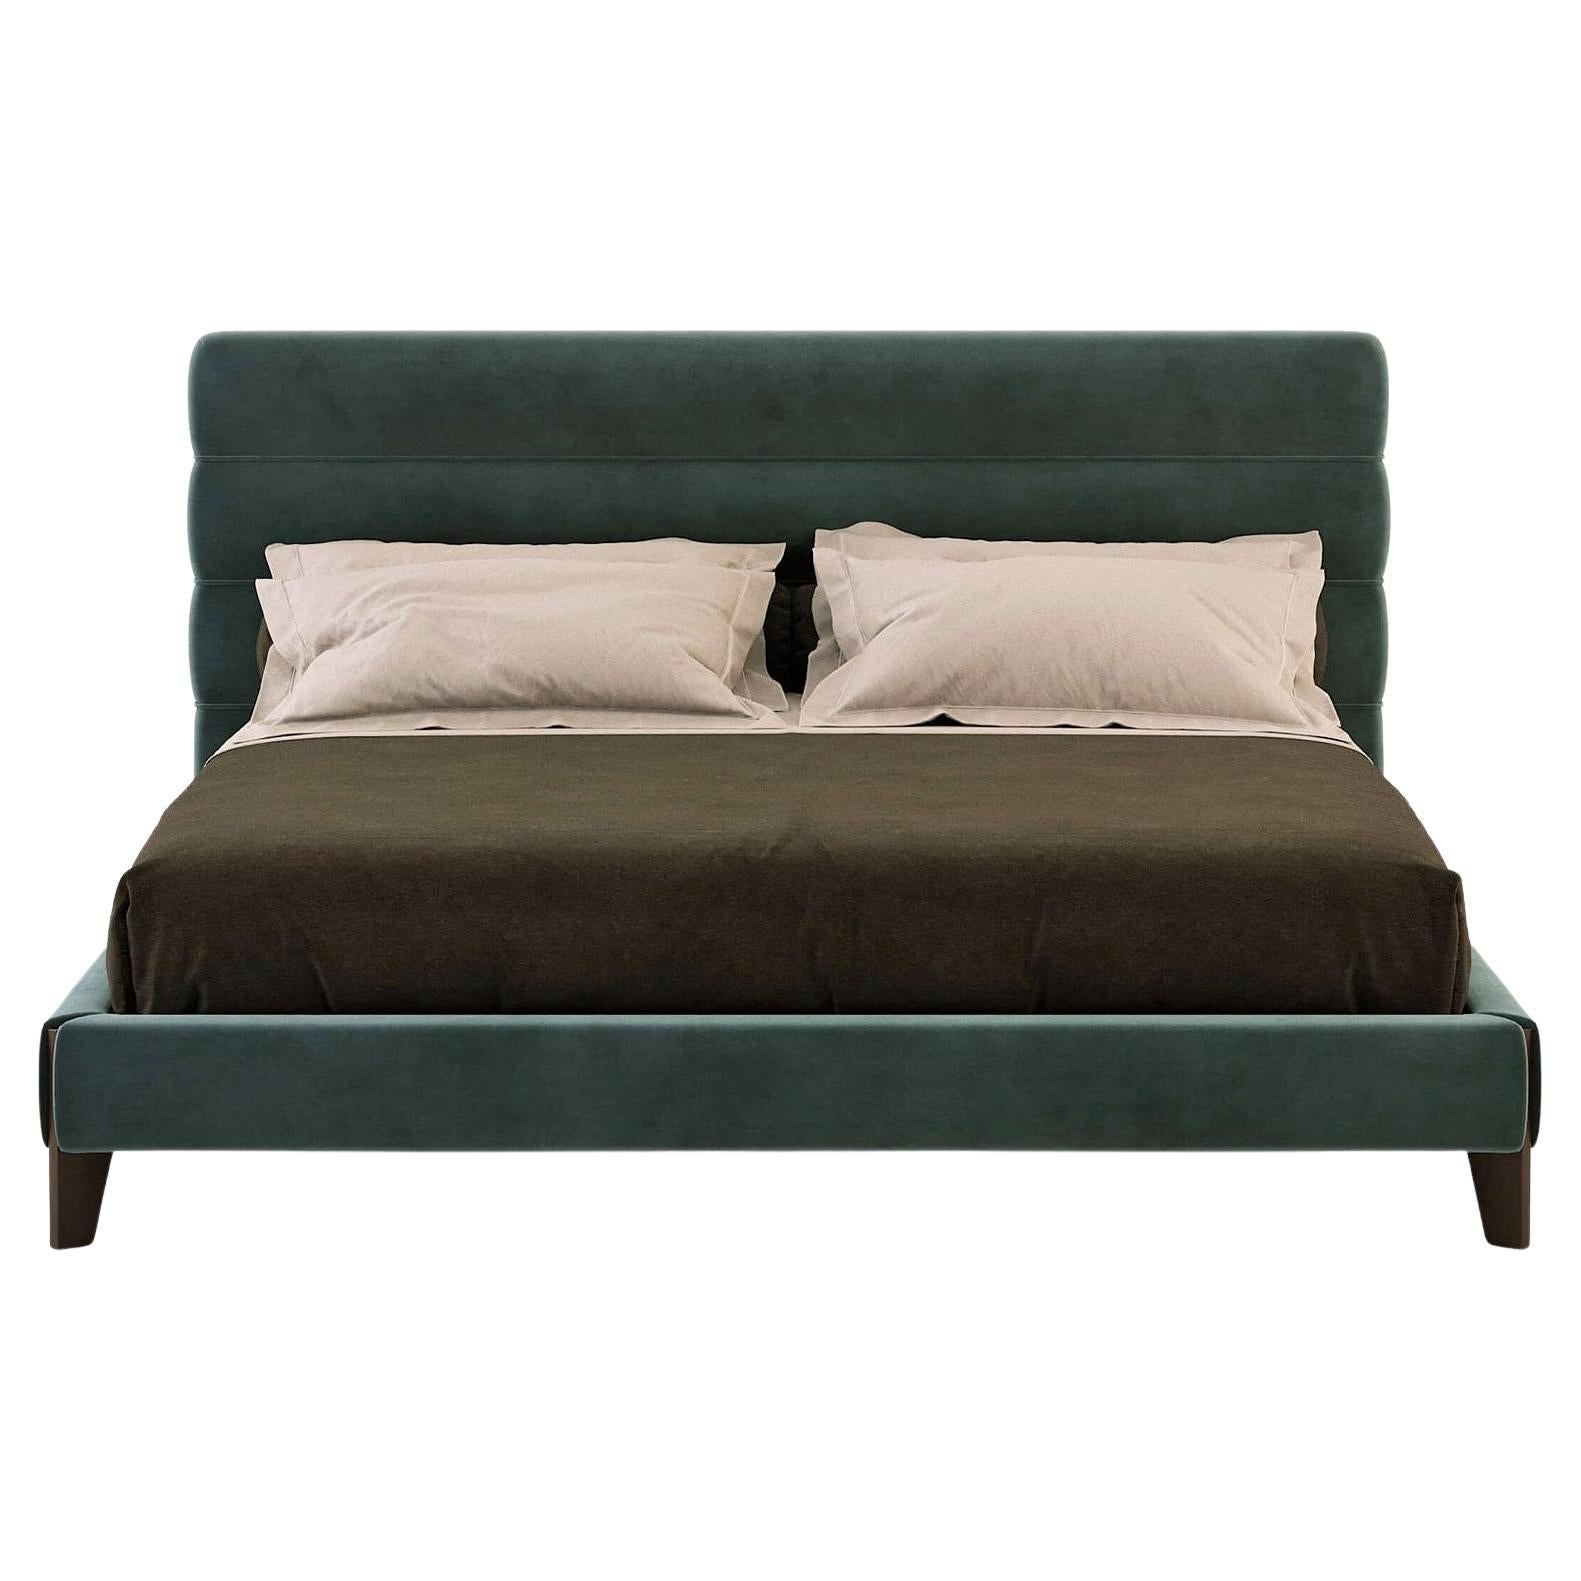 Timeless design suitable for contemporary residential or hotel projects. 
Fabrics: Storm blue velvet
Structure: Matt Smoked Eucalyptus.
Other materials and colors are also possible for this bed , See attached images for finish options and velvet